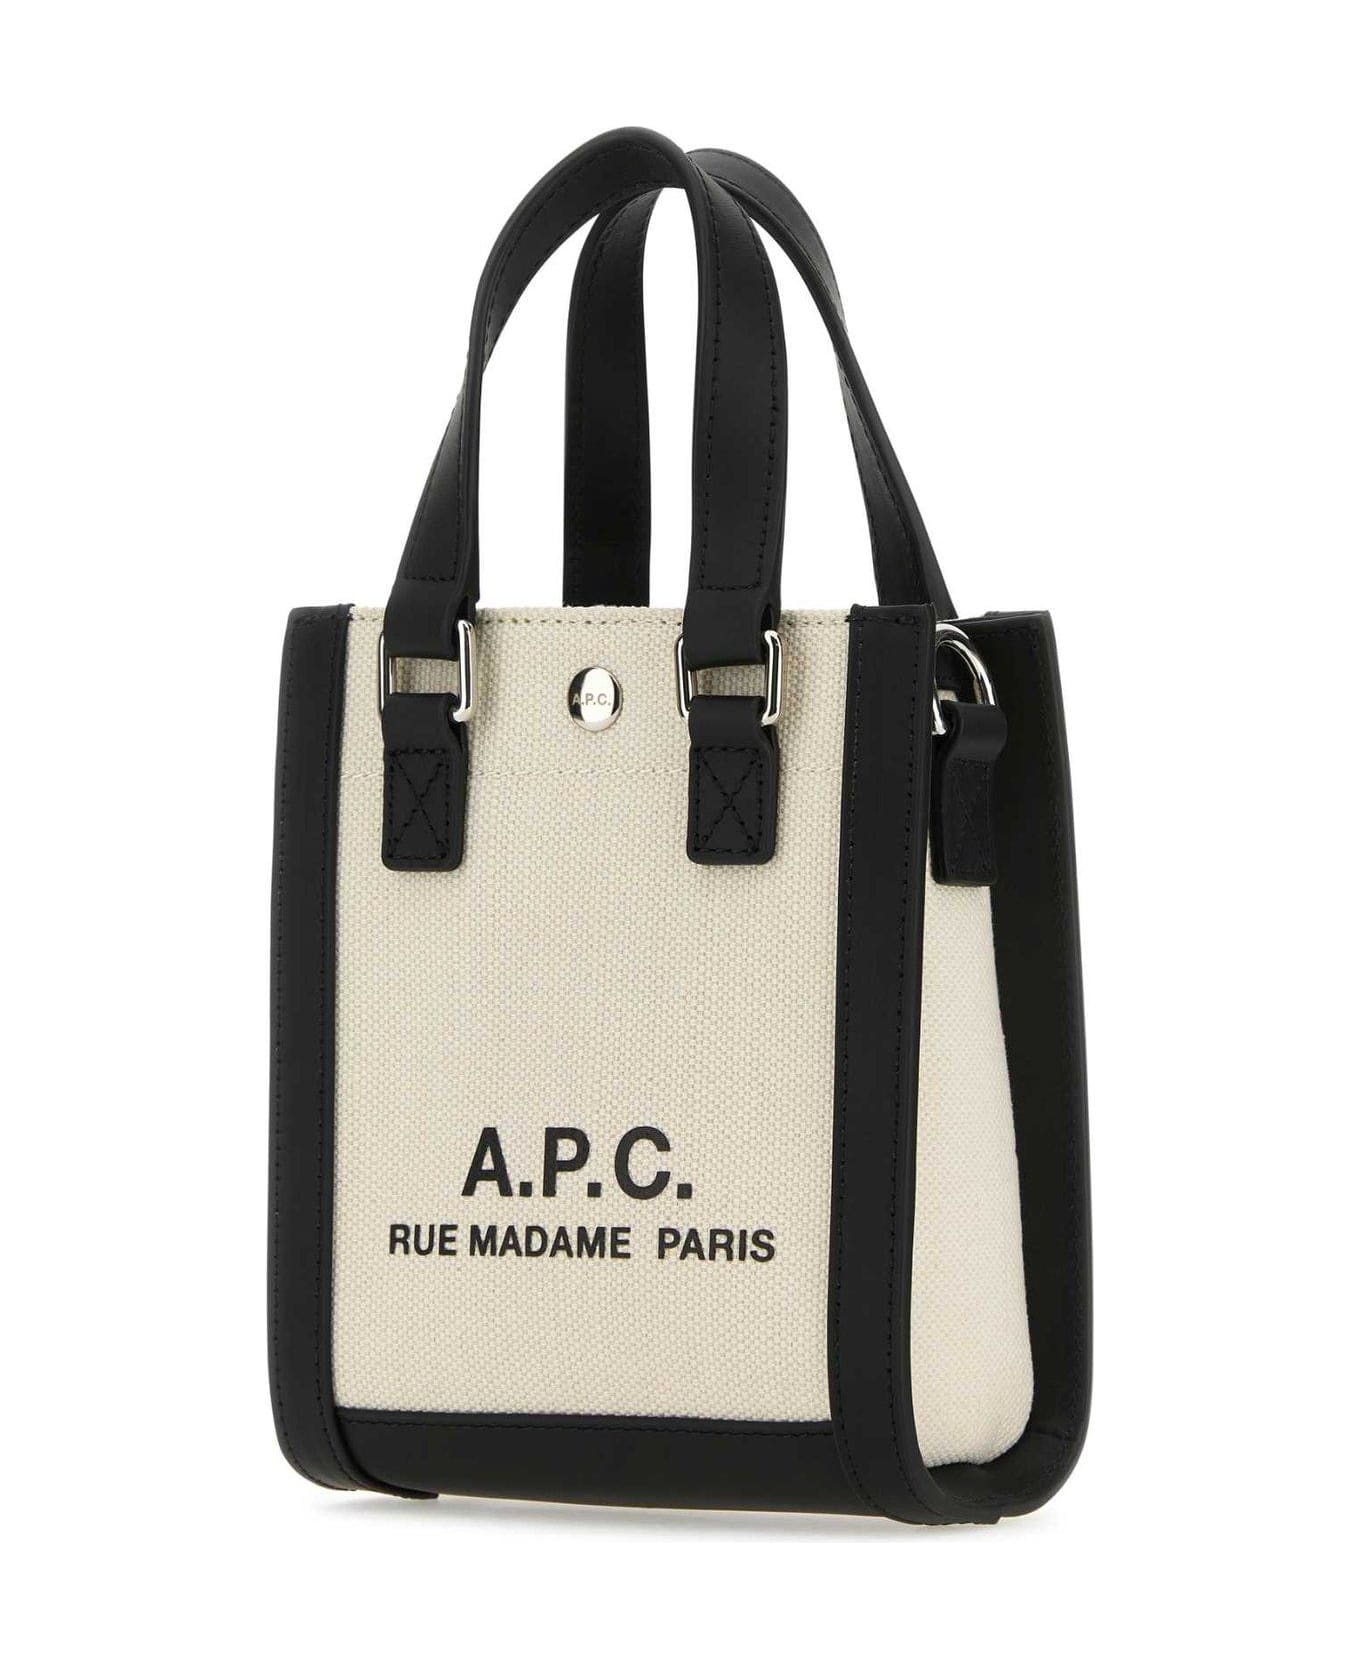 A.P.C. Camille Top Handle Bag - Black トートバッグ